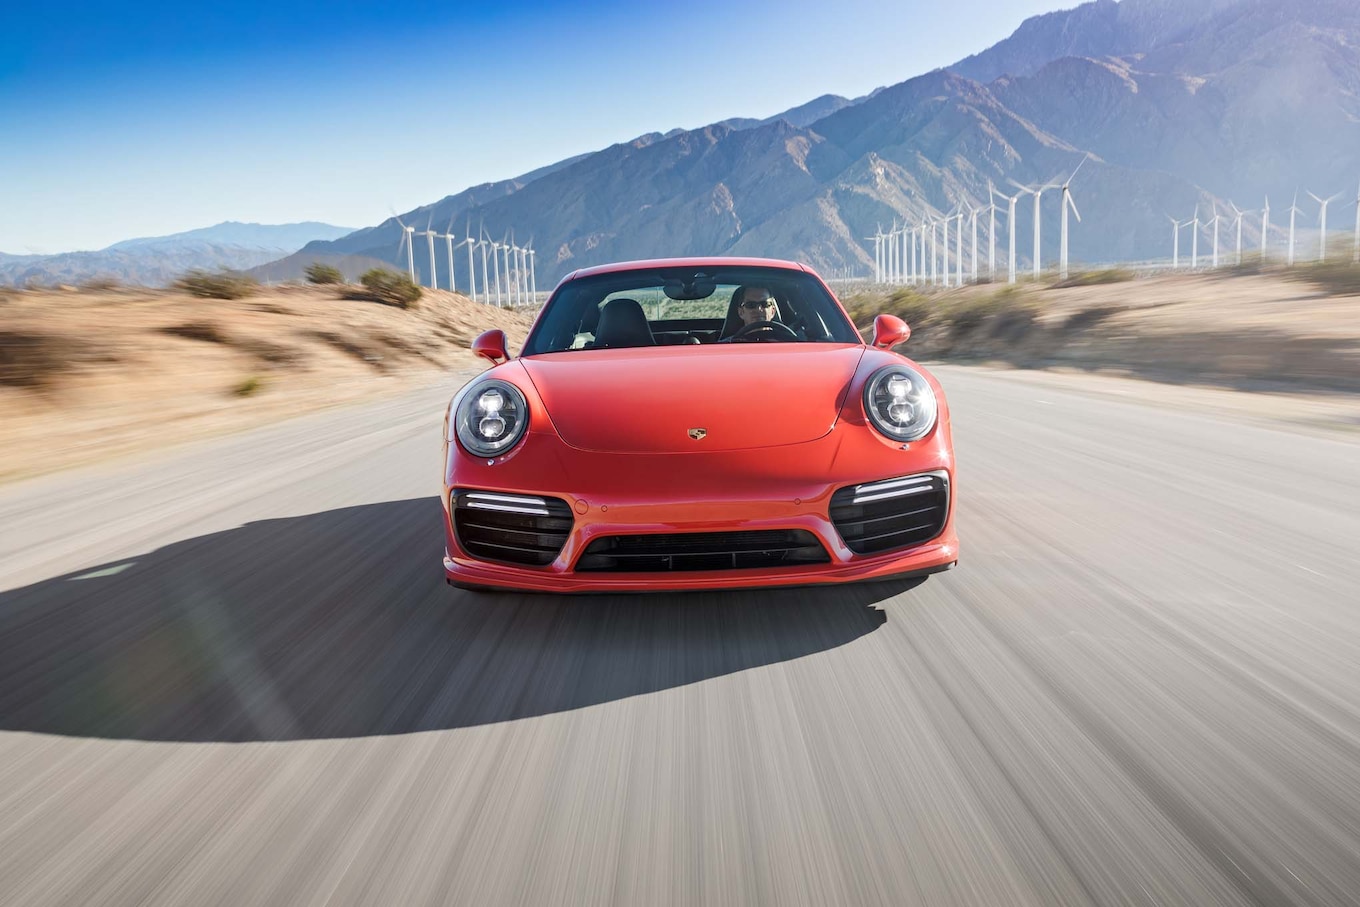 2017 Porsche 911 Turbo S front end in motion